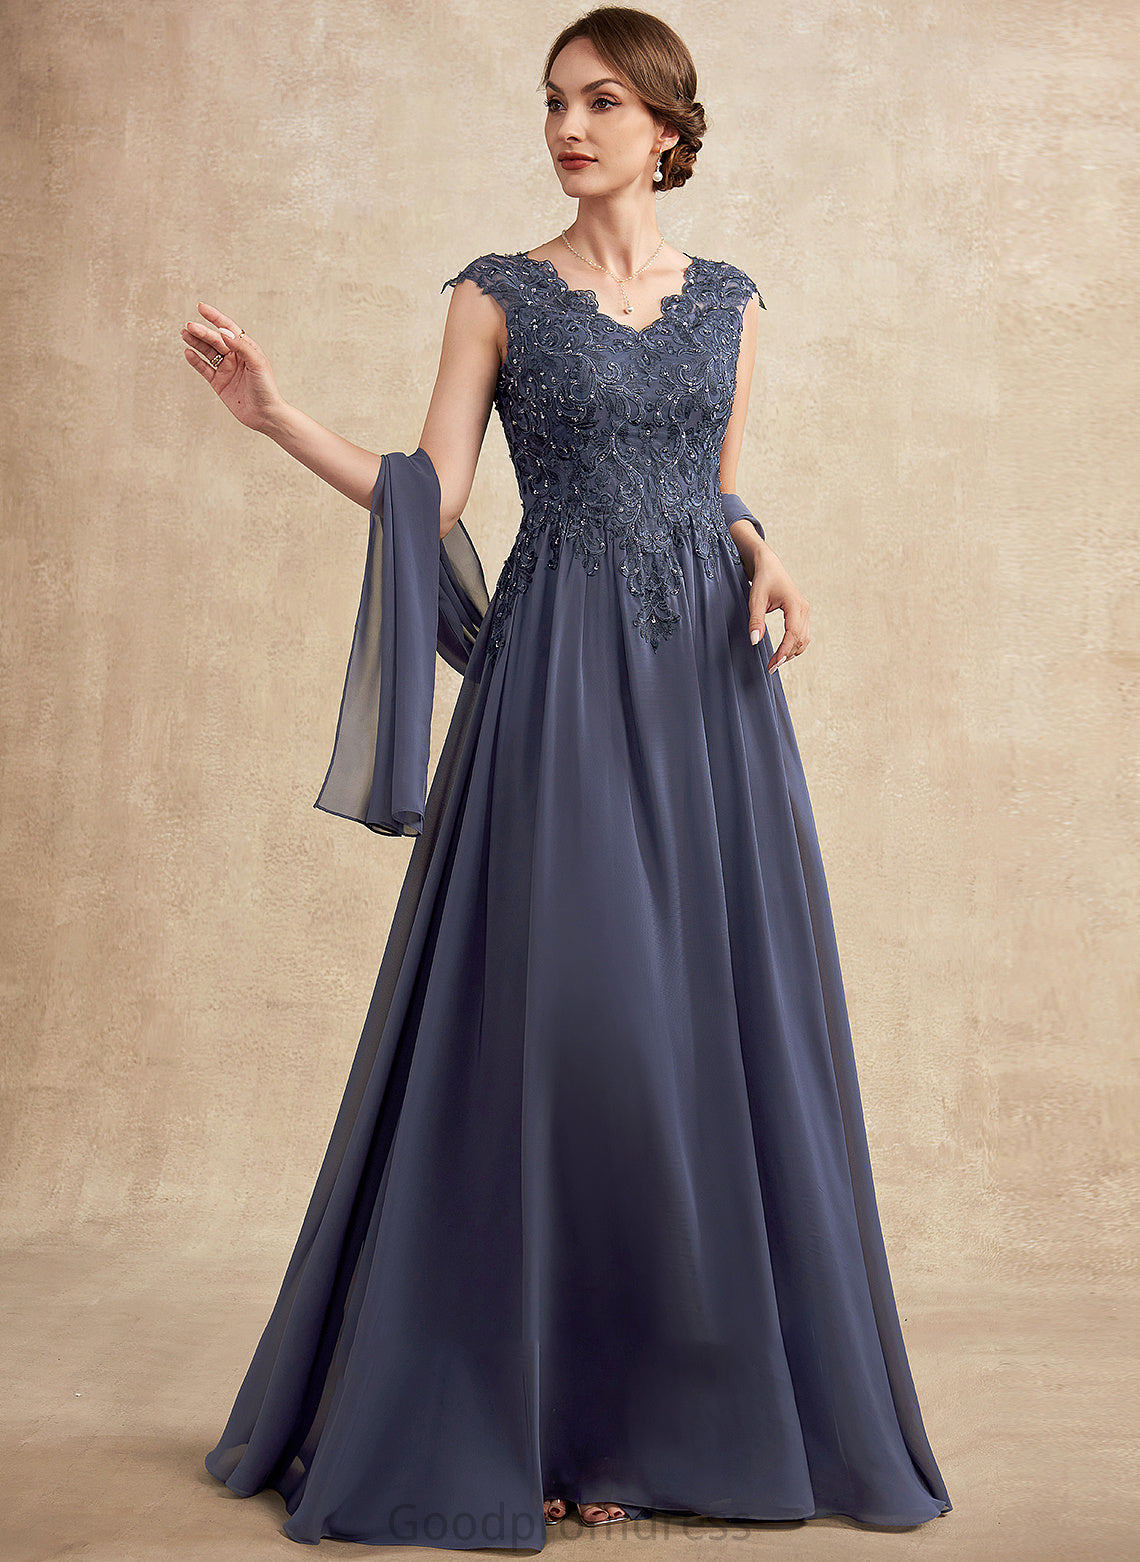 A-Line of With Floor-Length Beading Chiffon the Hayley Sequins Lace Dress Bride Mother of the Bride Dresses V-neck Mother